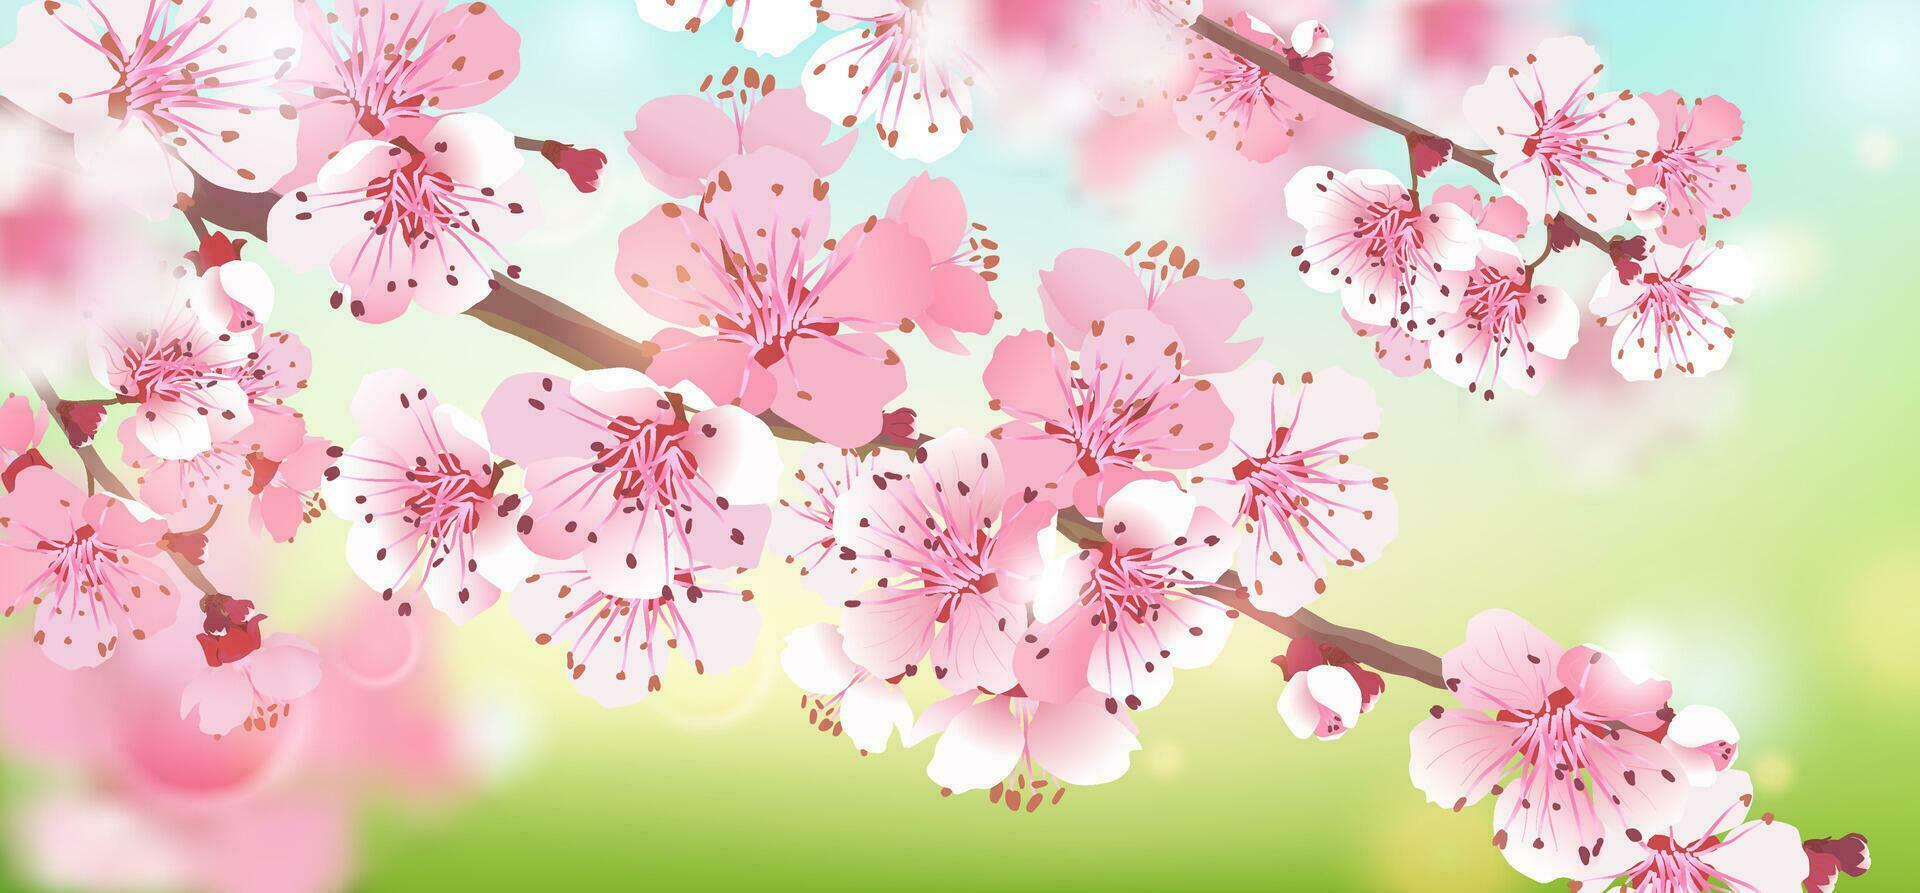 Realistic branch of pink Sakura on a blue-green background. Cherry blossom is a symbol of love, spring. Vector illustration for wedding invitations, background. Design for Wallpaper, flower.